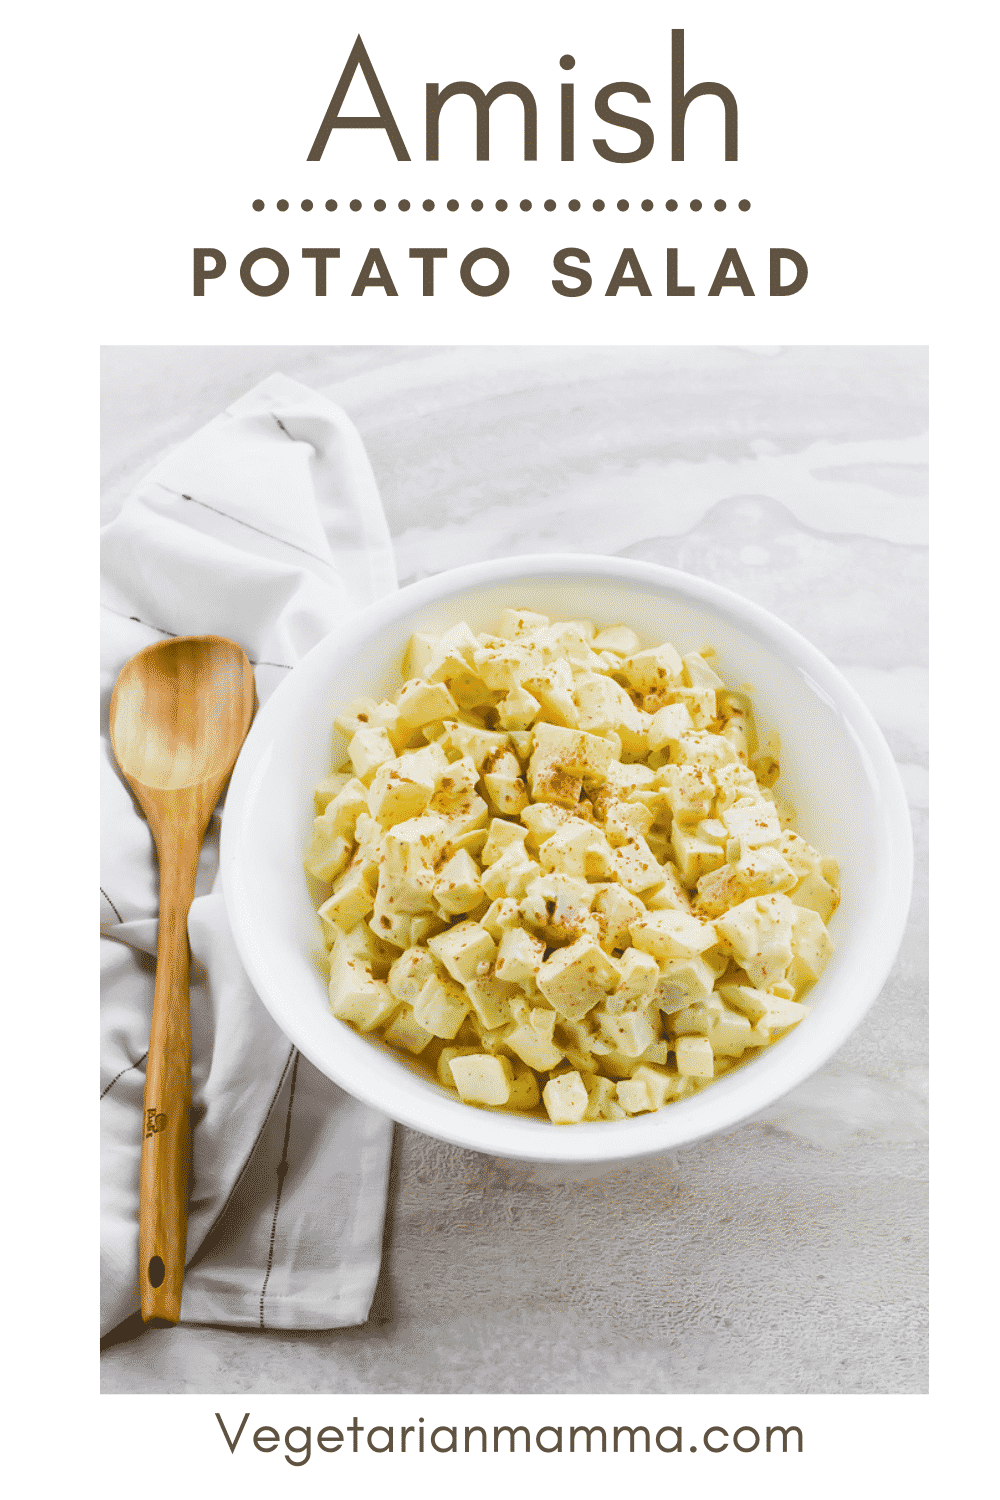 Amish Potato Salad is my favorite BBQ side dish! This is the best potato salad recipe with hard boiled eggs, onions, and celery wrapped in a sweet and tangy yellow mustard dressing. #bbq #easyrecipe #sidedish #amishpotatosalad #potatosalad